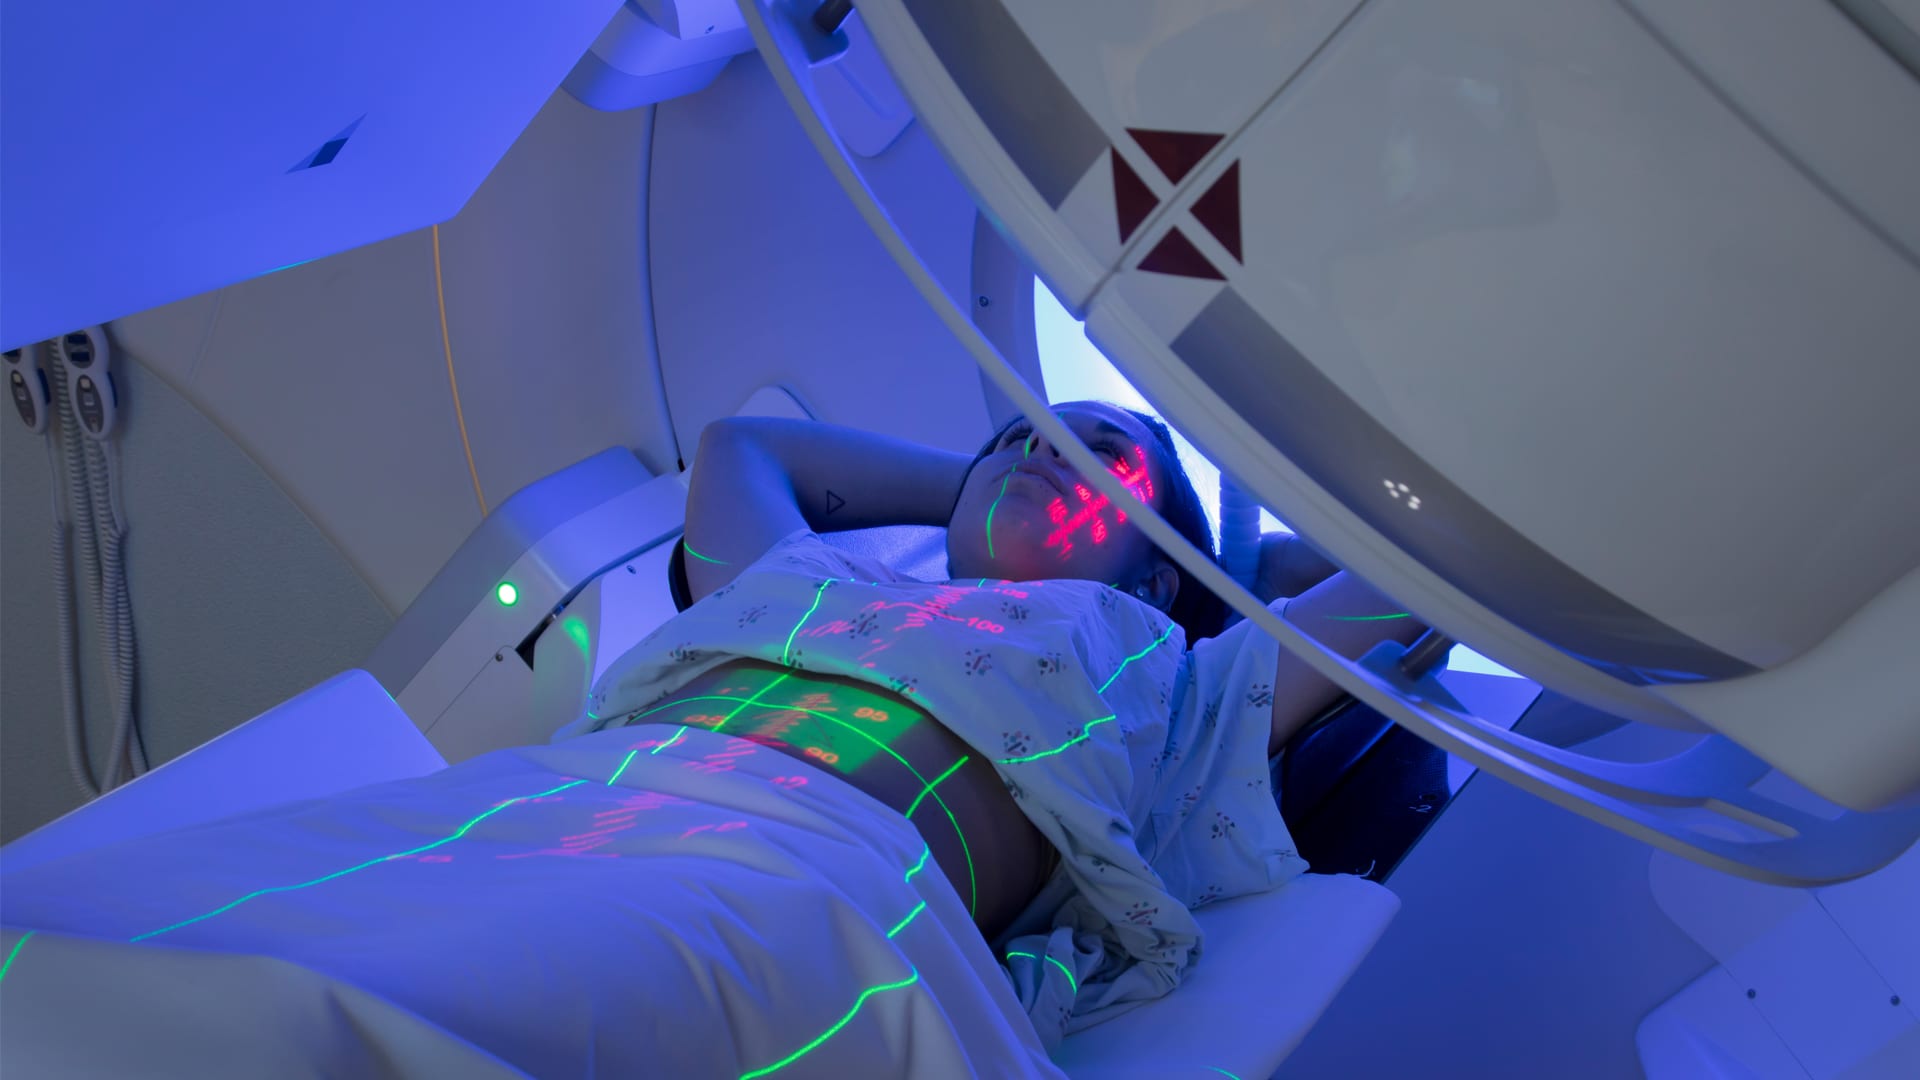 Radiation therapy: the future of battling cancer